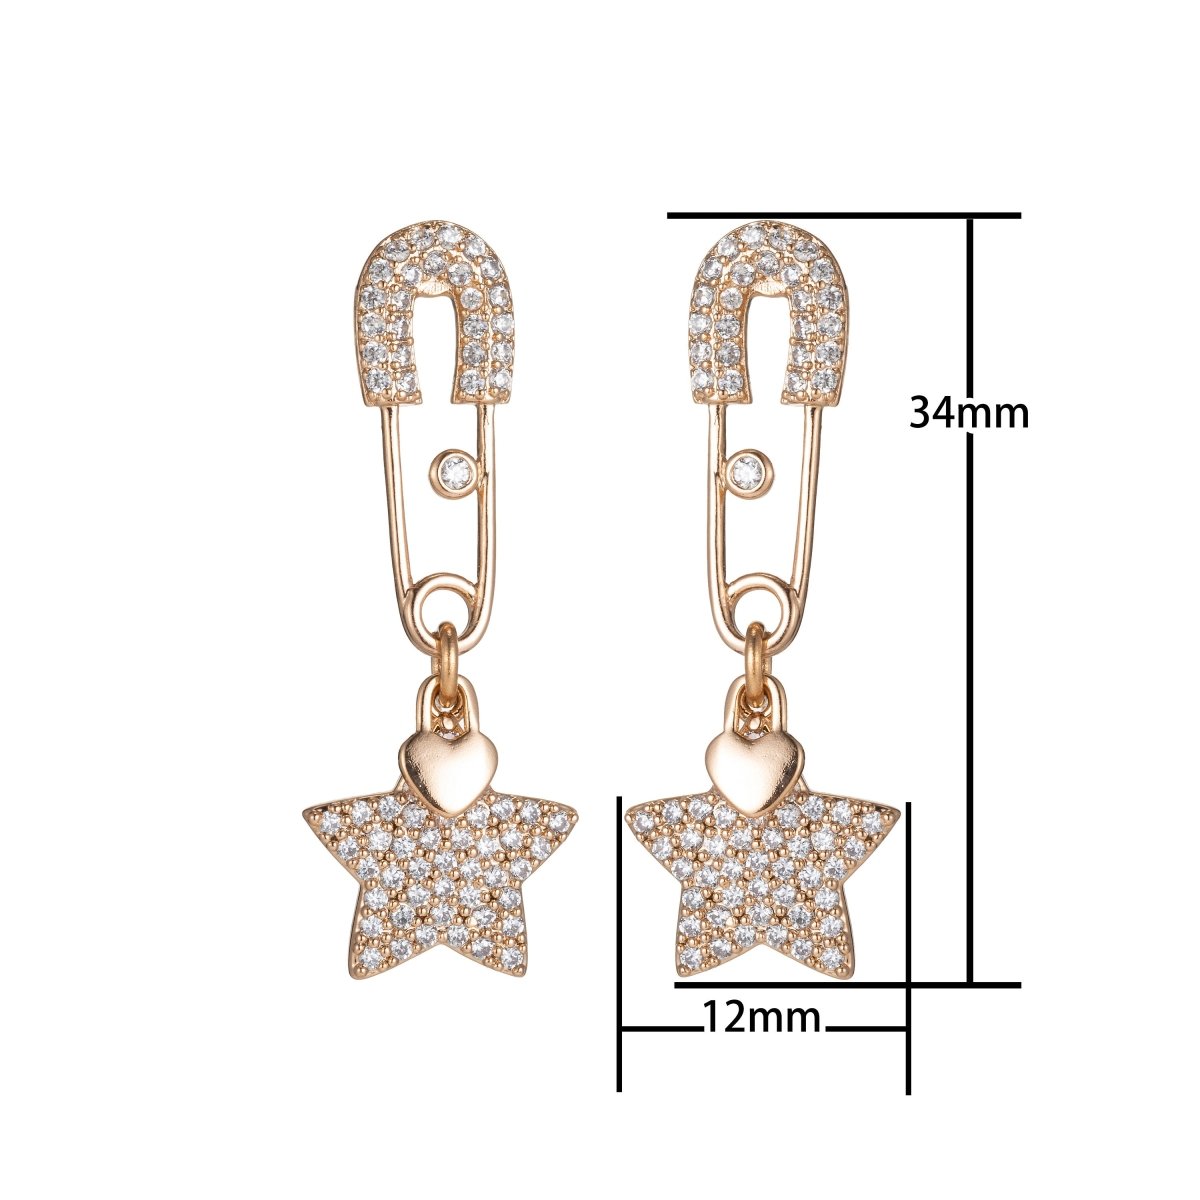 Micro Pave Safety pin Earring Gold Dangel earring with Star charm in 18k gold filled for everyday wear earring Q-011 - DLUXCA